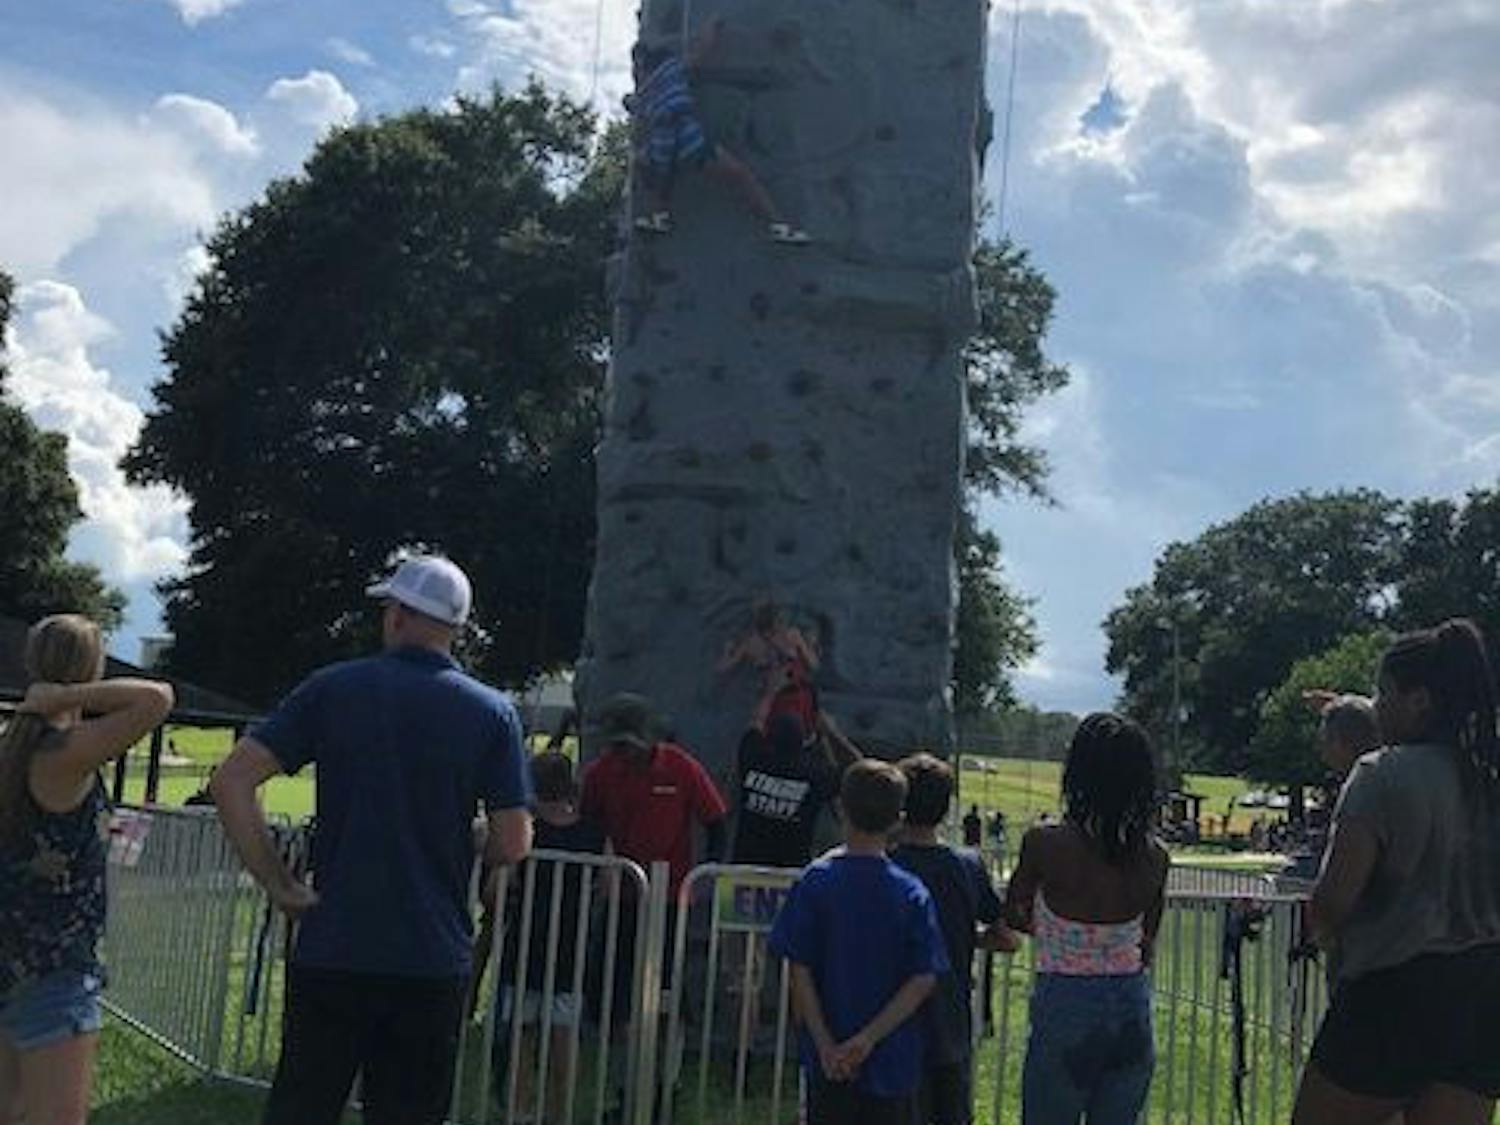 A crowd gathers to watch two people climb the rock climbing wall.
&nbsp;